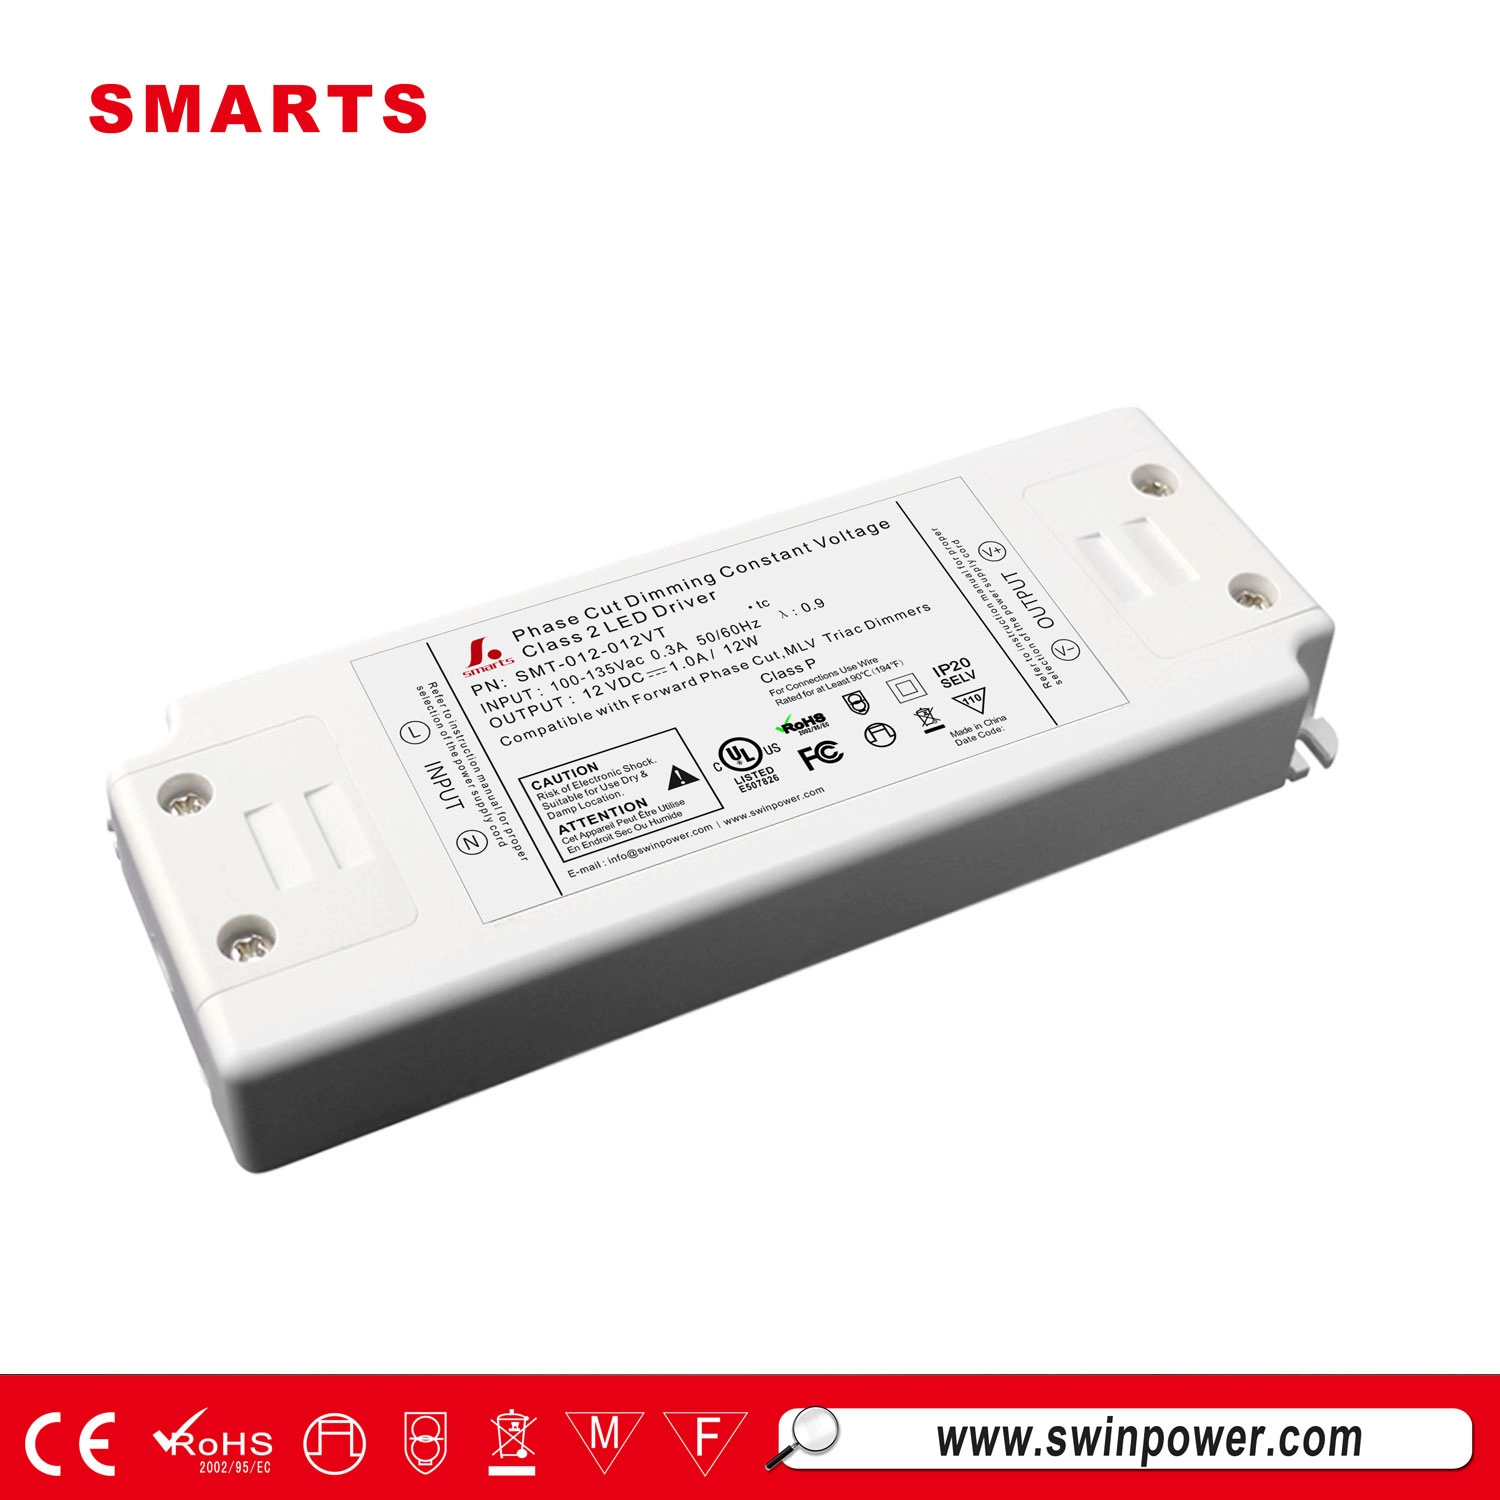 12vdc 1amp 12w led constant voltage bulbs triac dimmable led driver